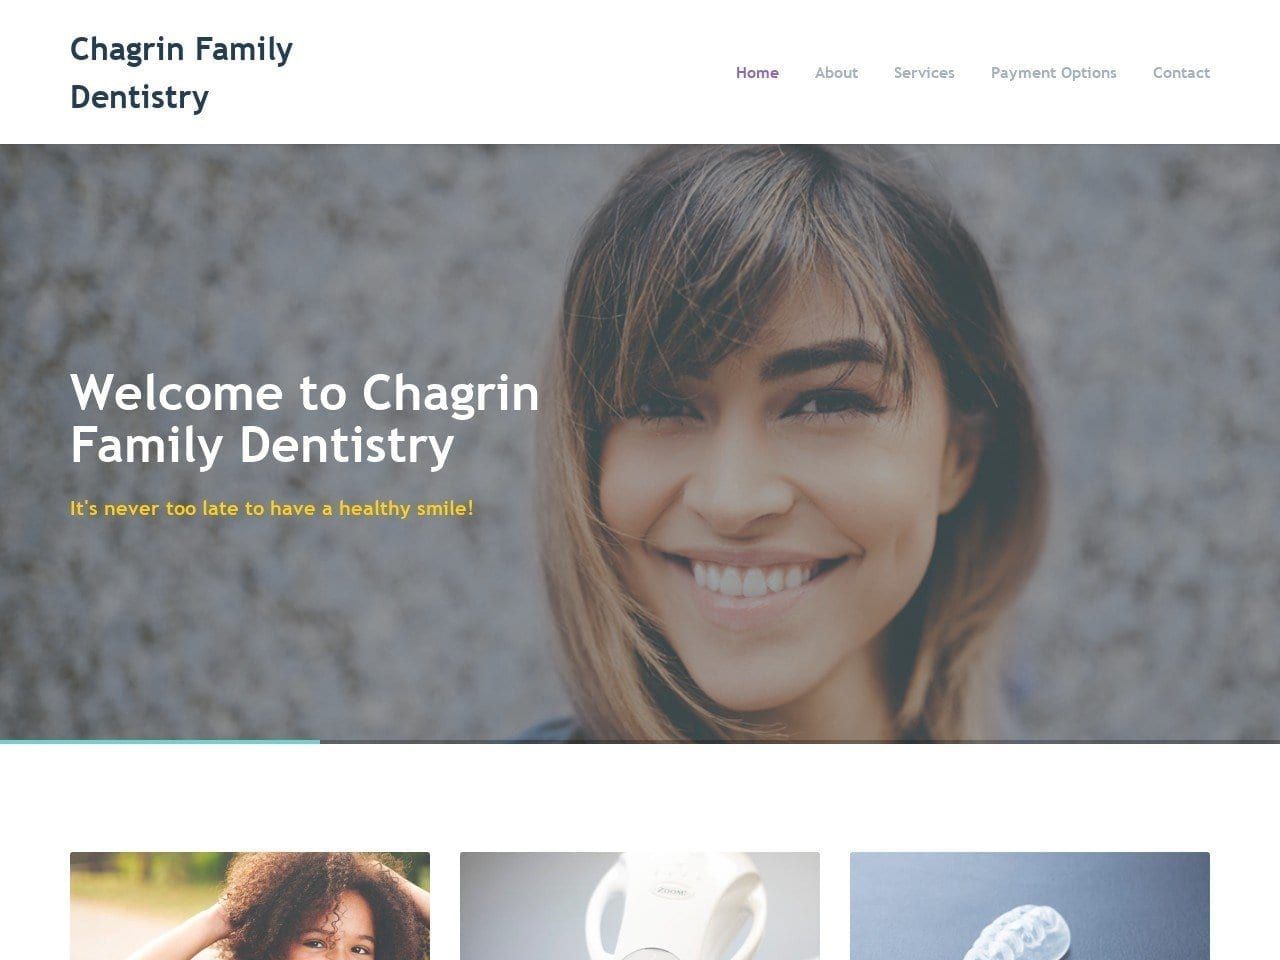 Chagrin Family Dentist Website Screenshot from chagrindental.com